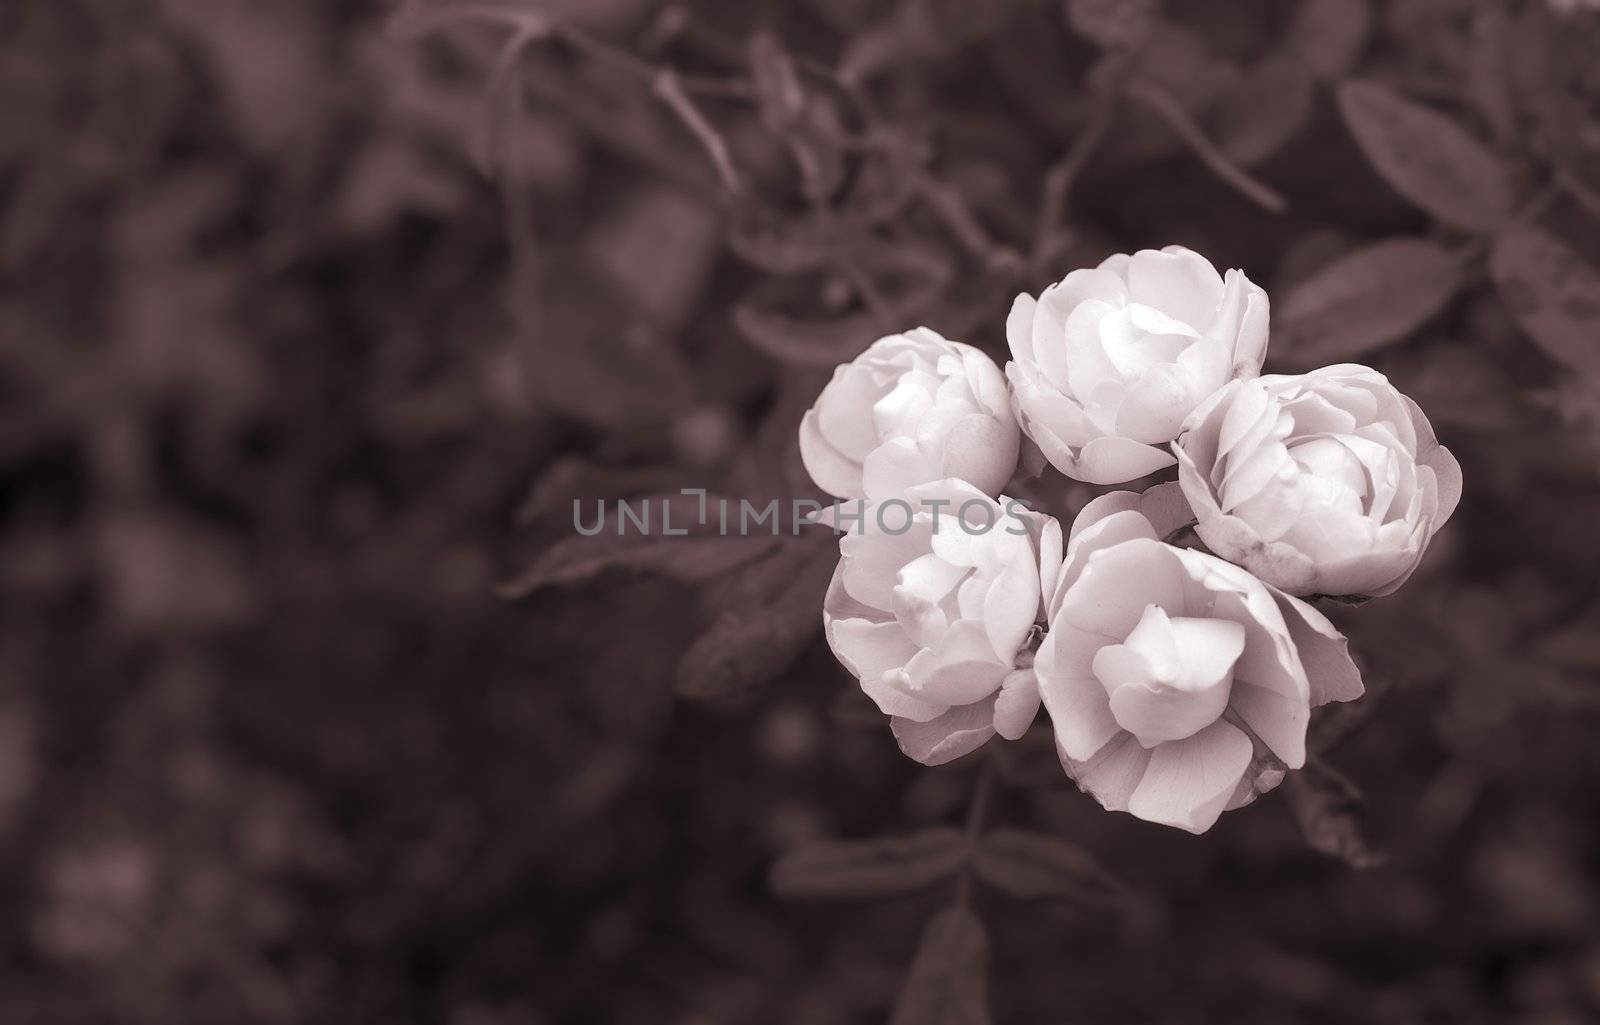 It is a beautiful five snow white rose, painted with sepia tone.